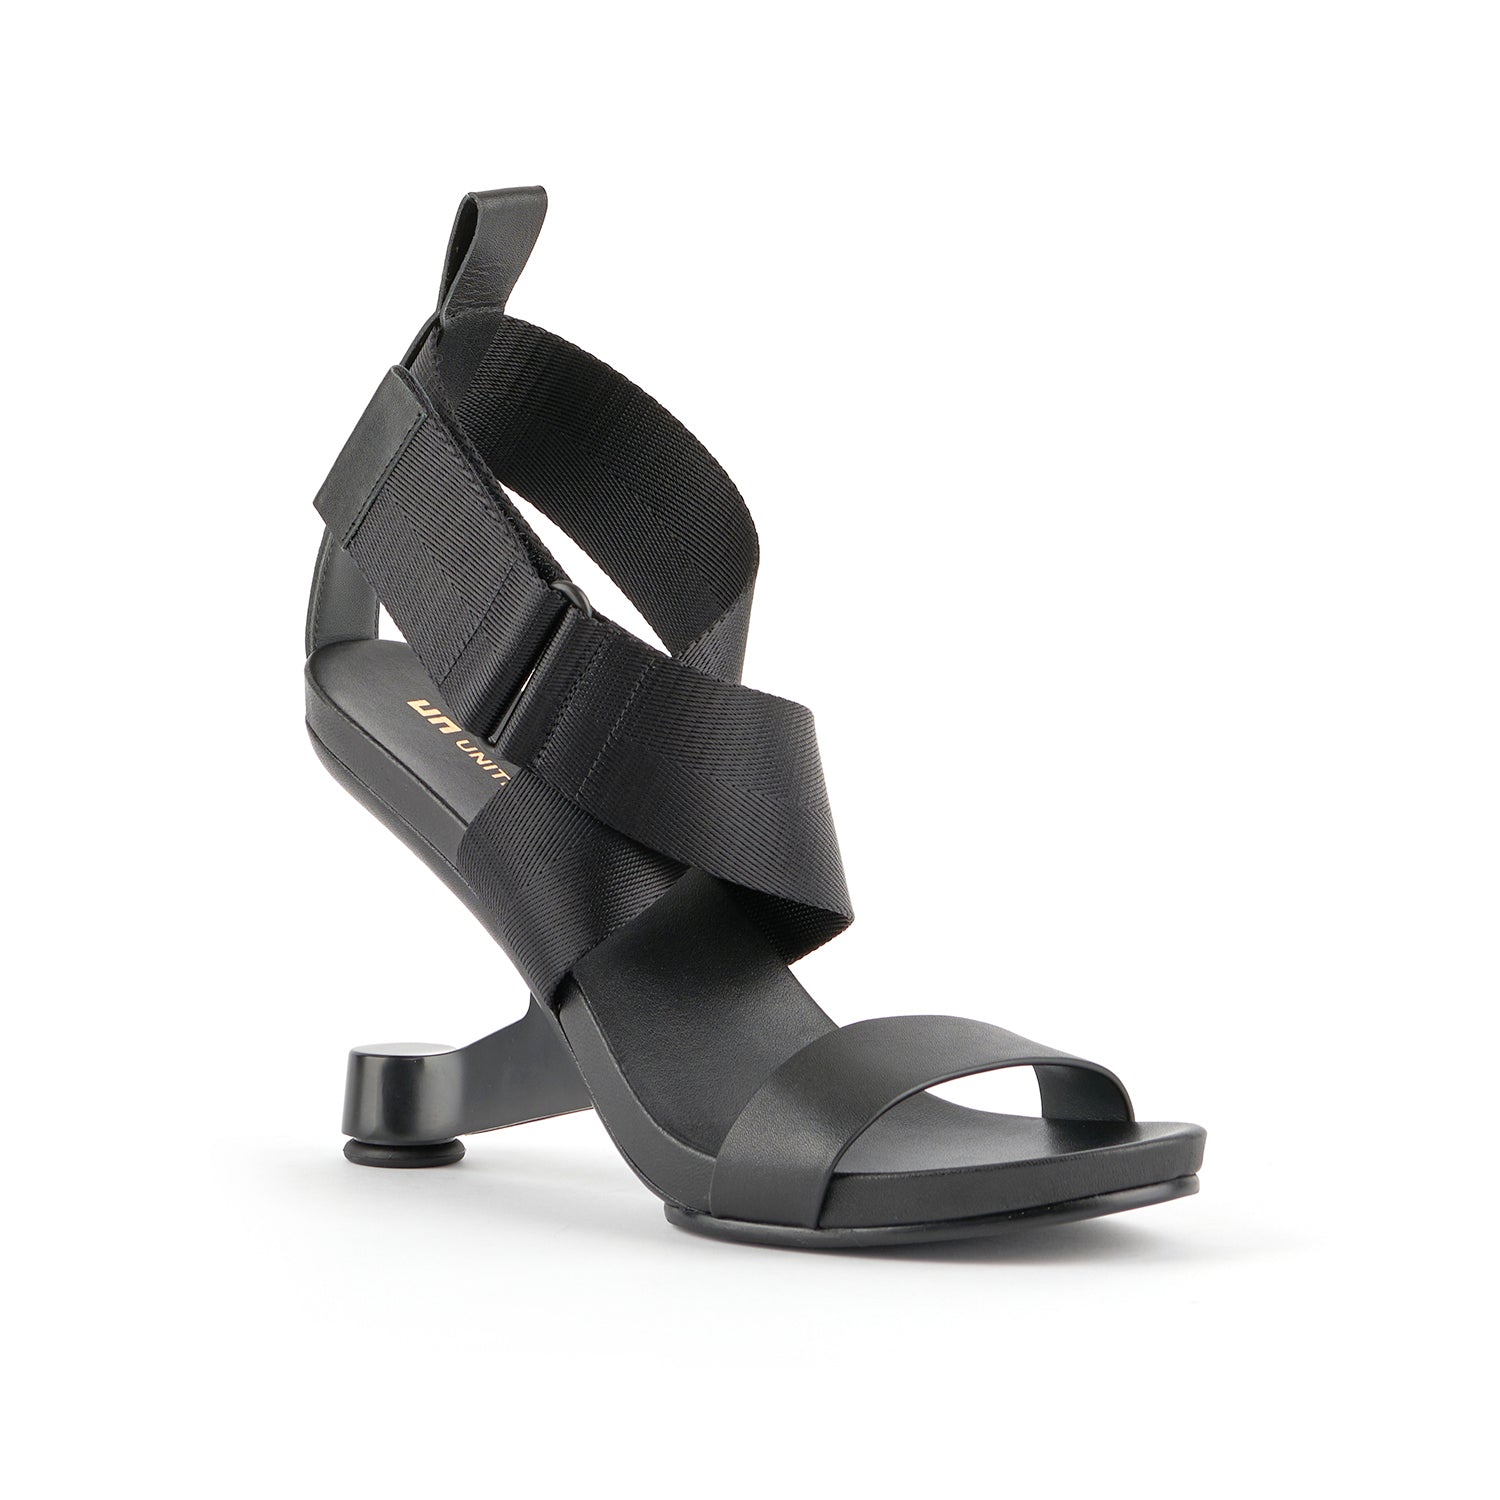 outer front side view of the united nude eamz IX Black high heeled sandal.